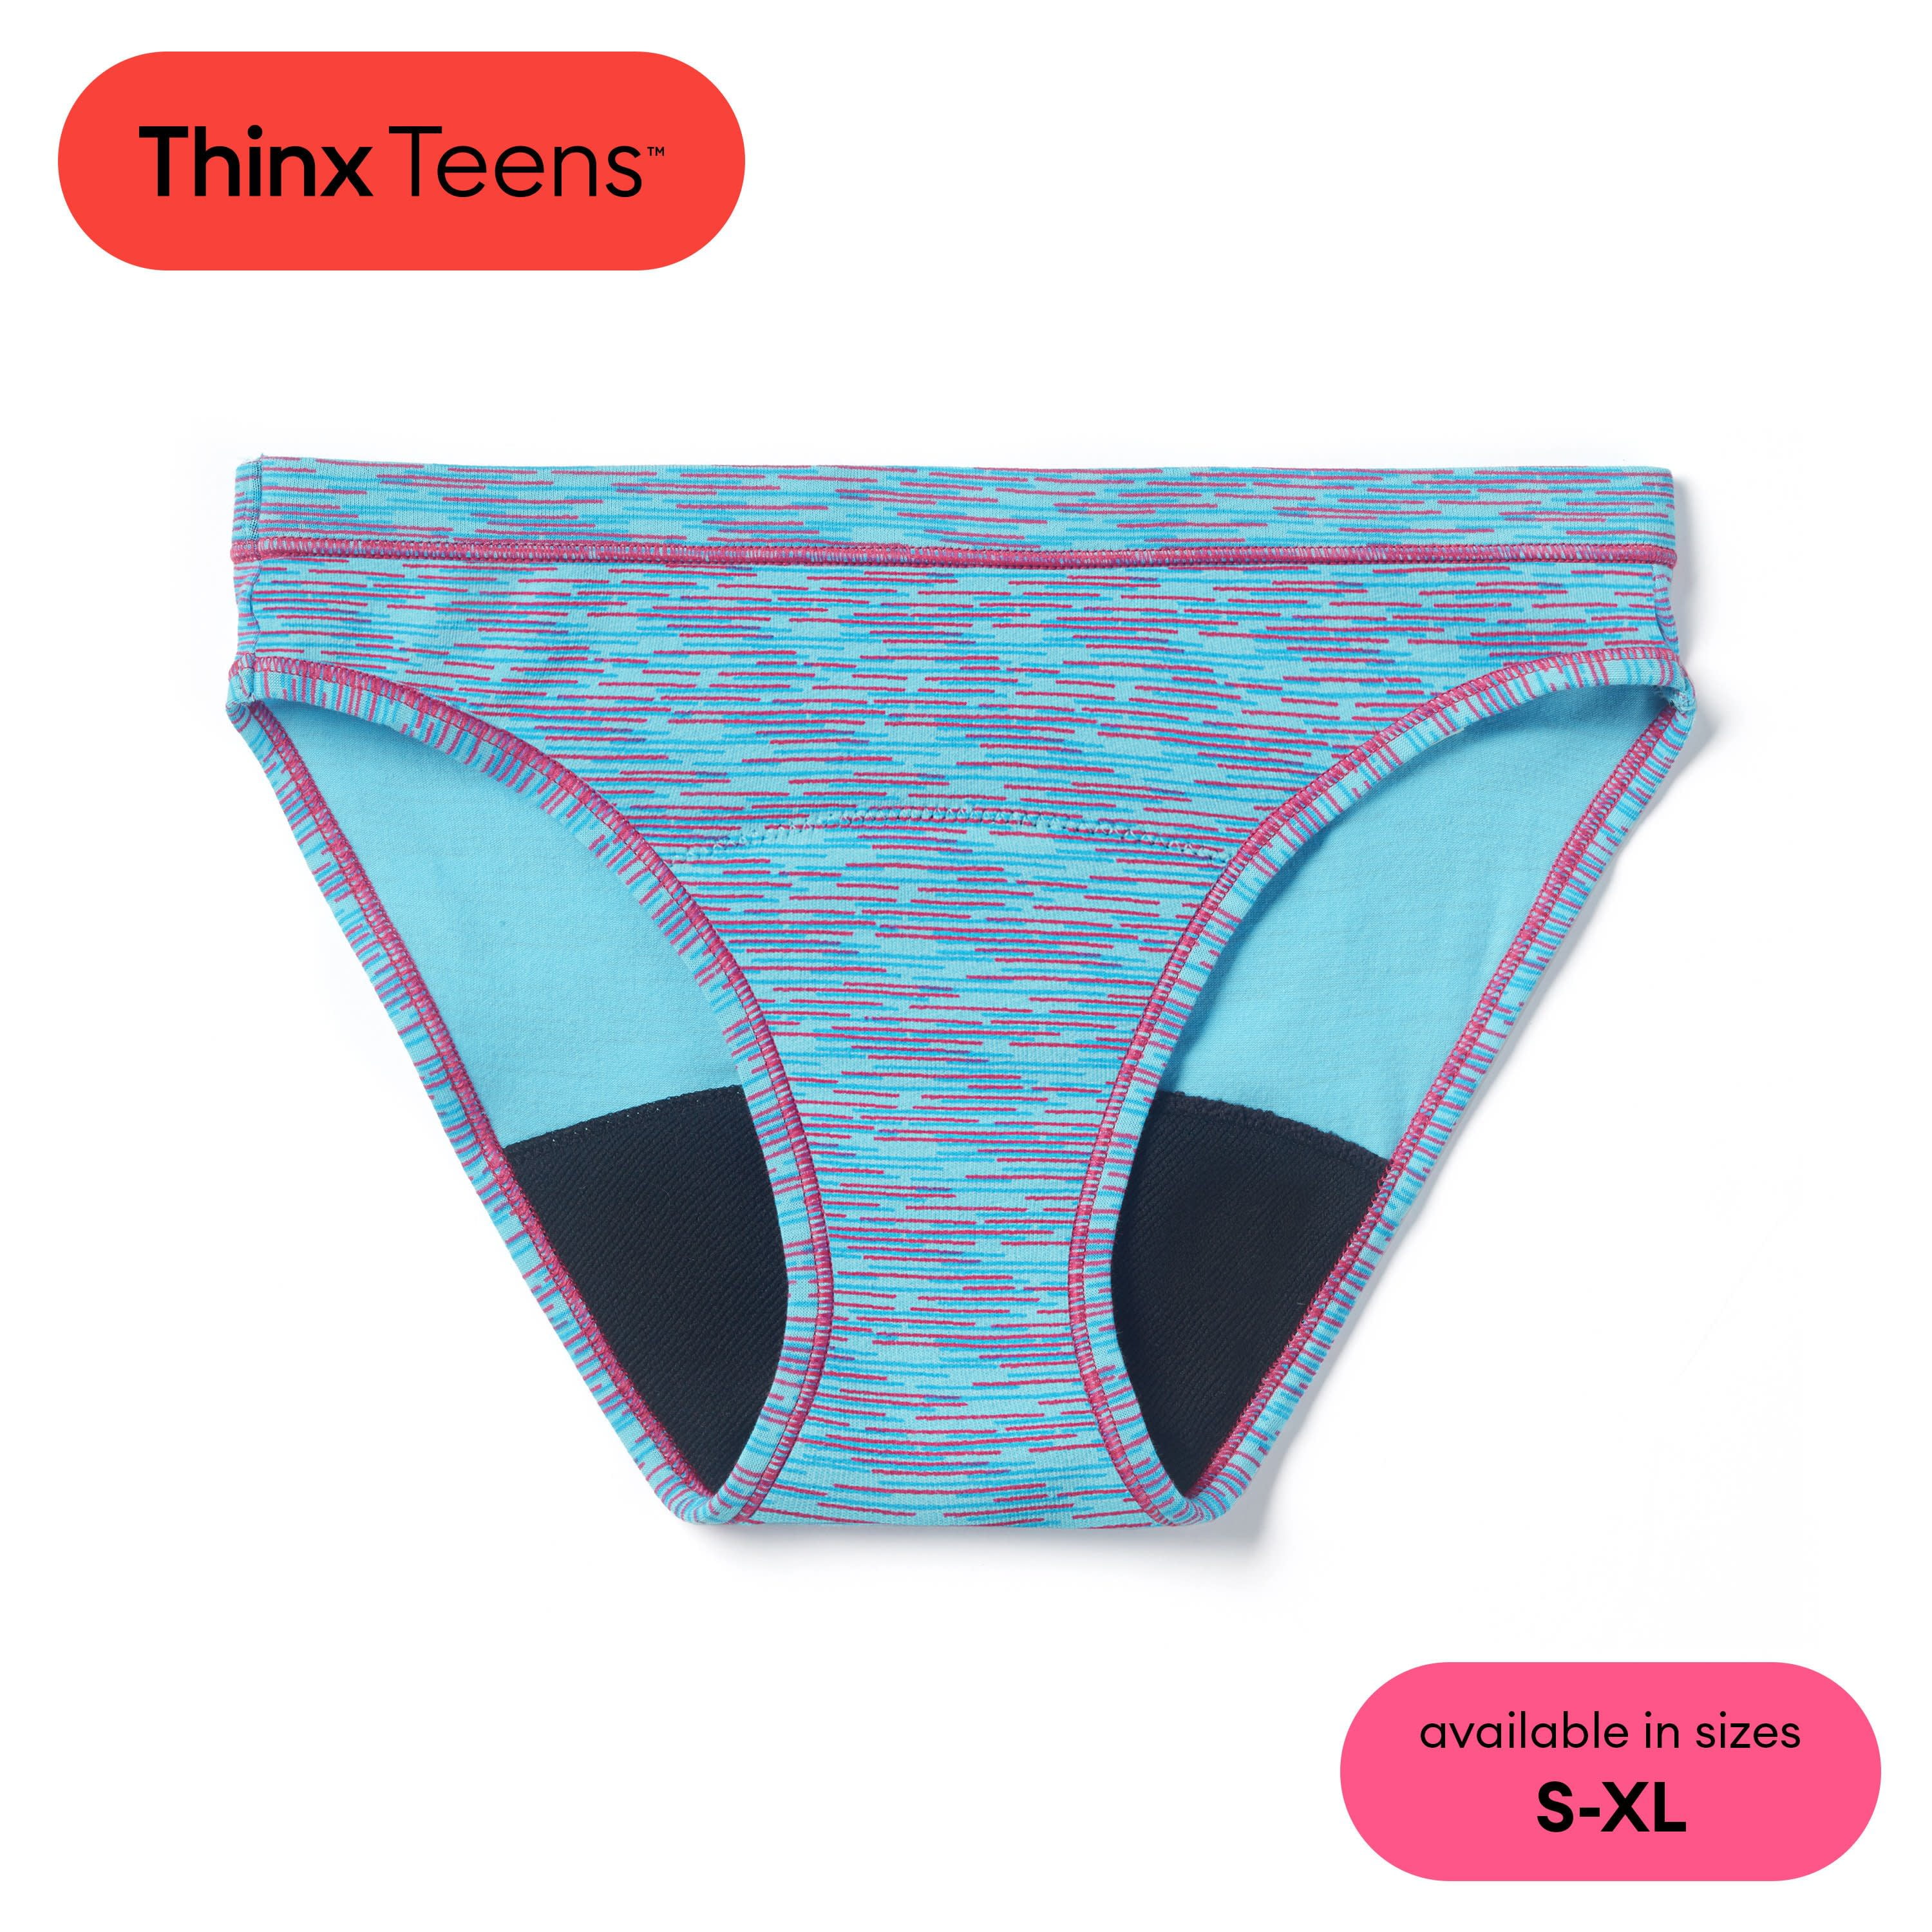 Oh-No' Proof Underwear by Knixteen - The first ever period underwear made  exclusively for teens